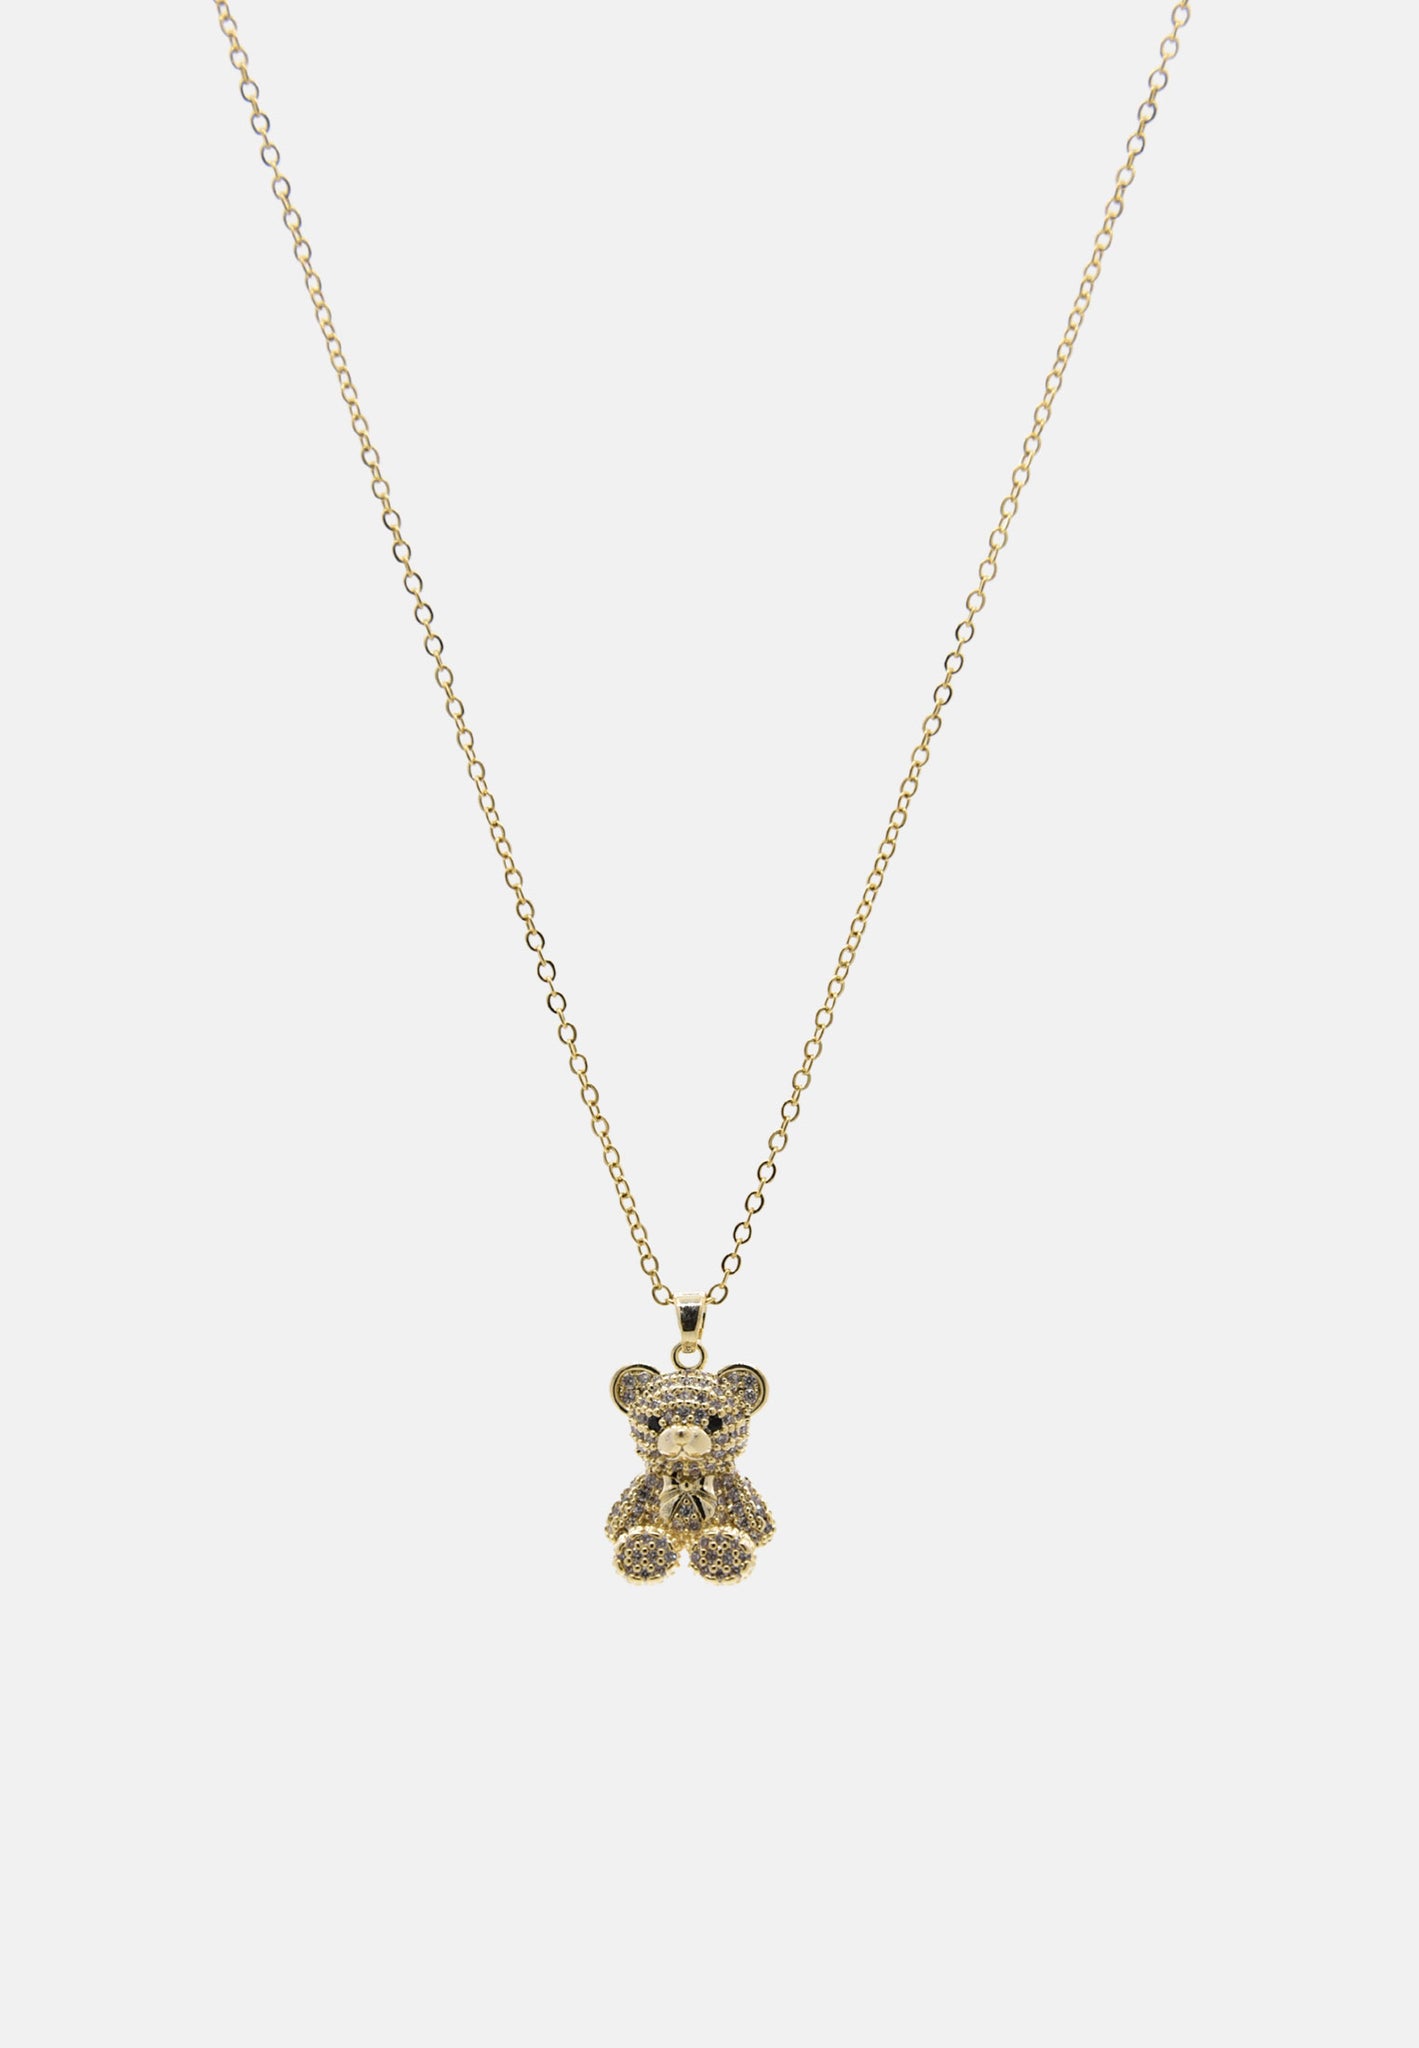 Necklace with glitter teddy bear